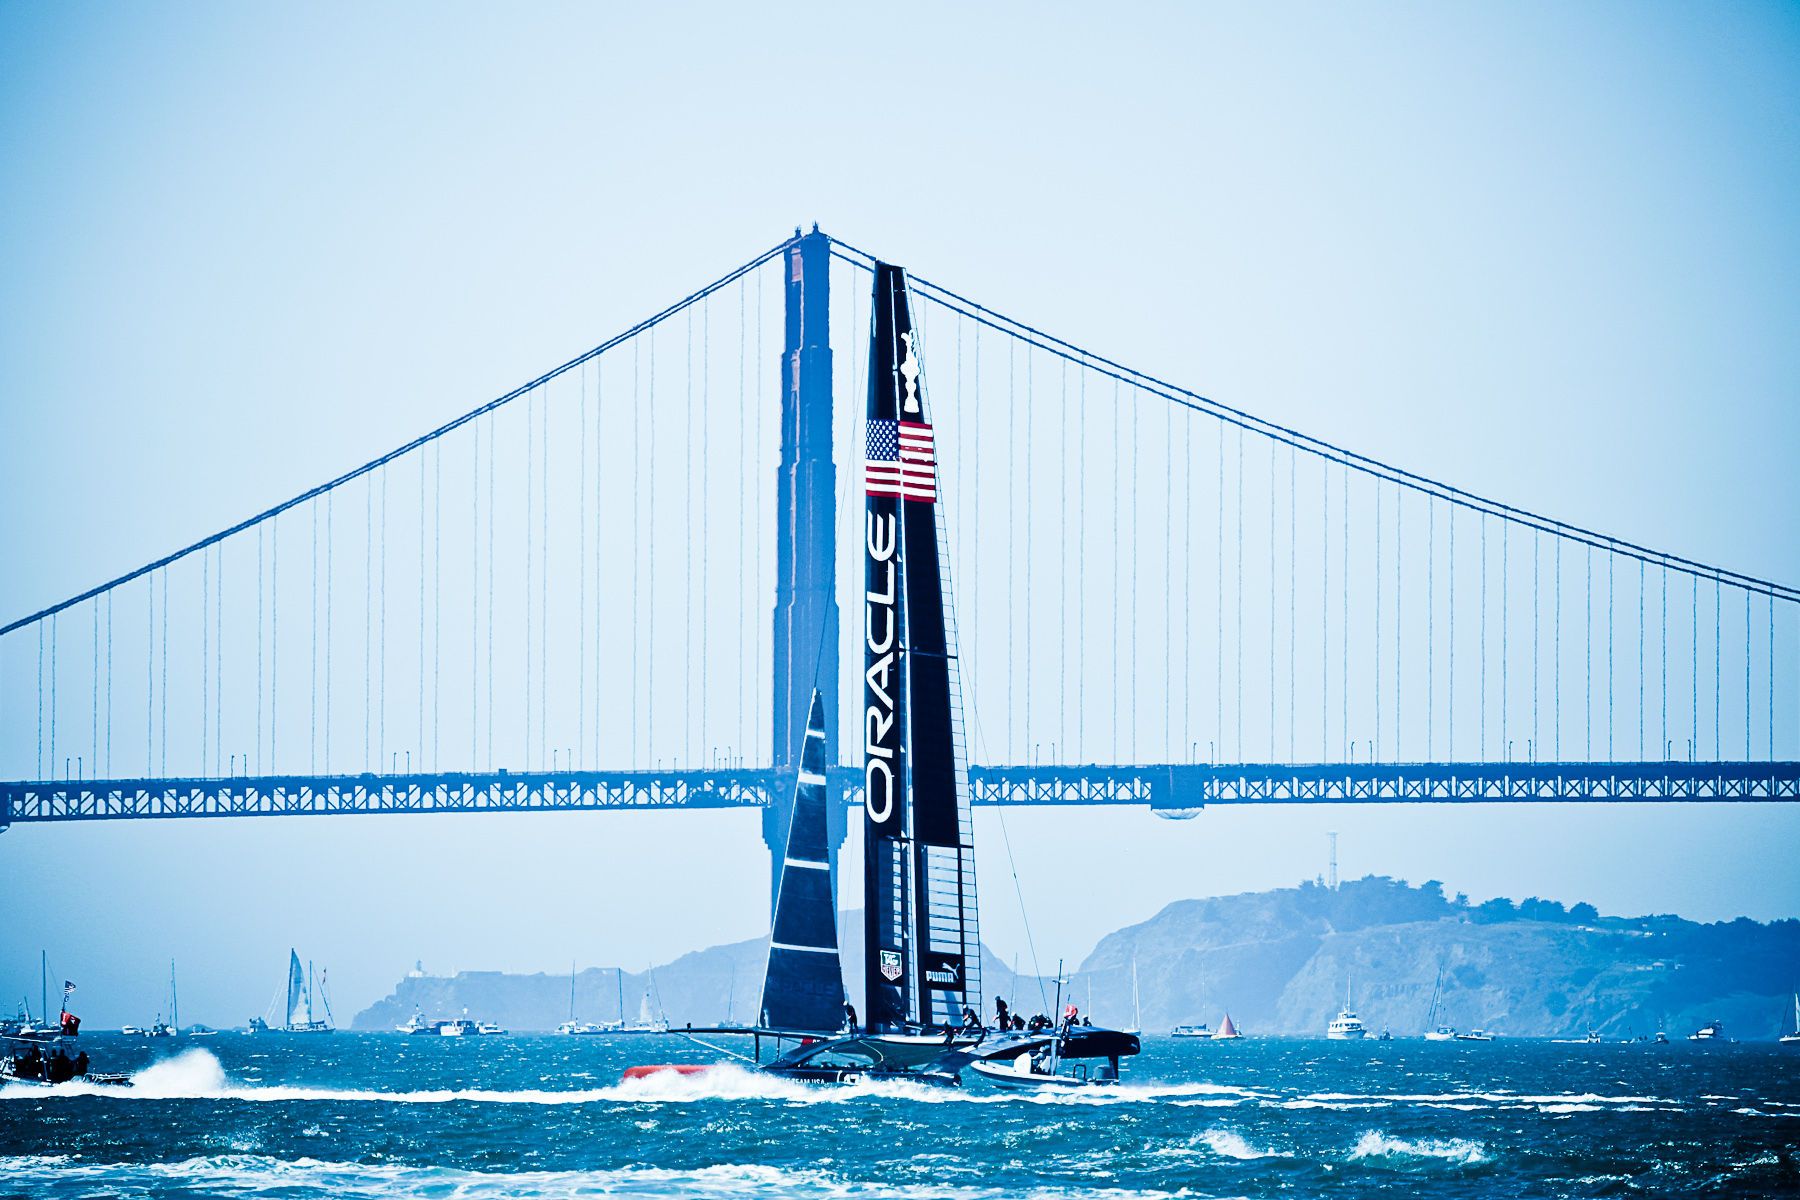 Silicon Valley Sailing-America's Cup